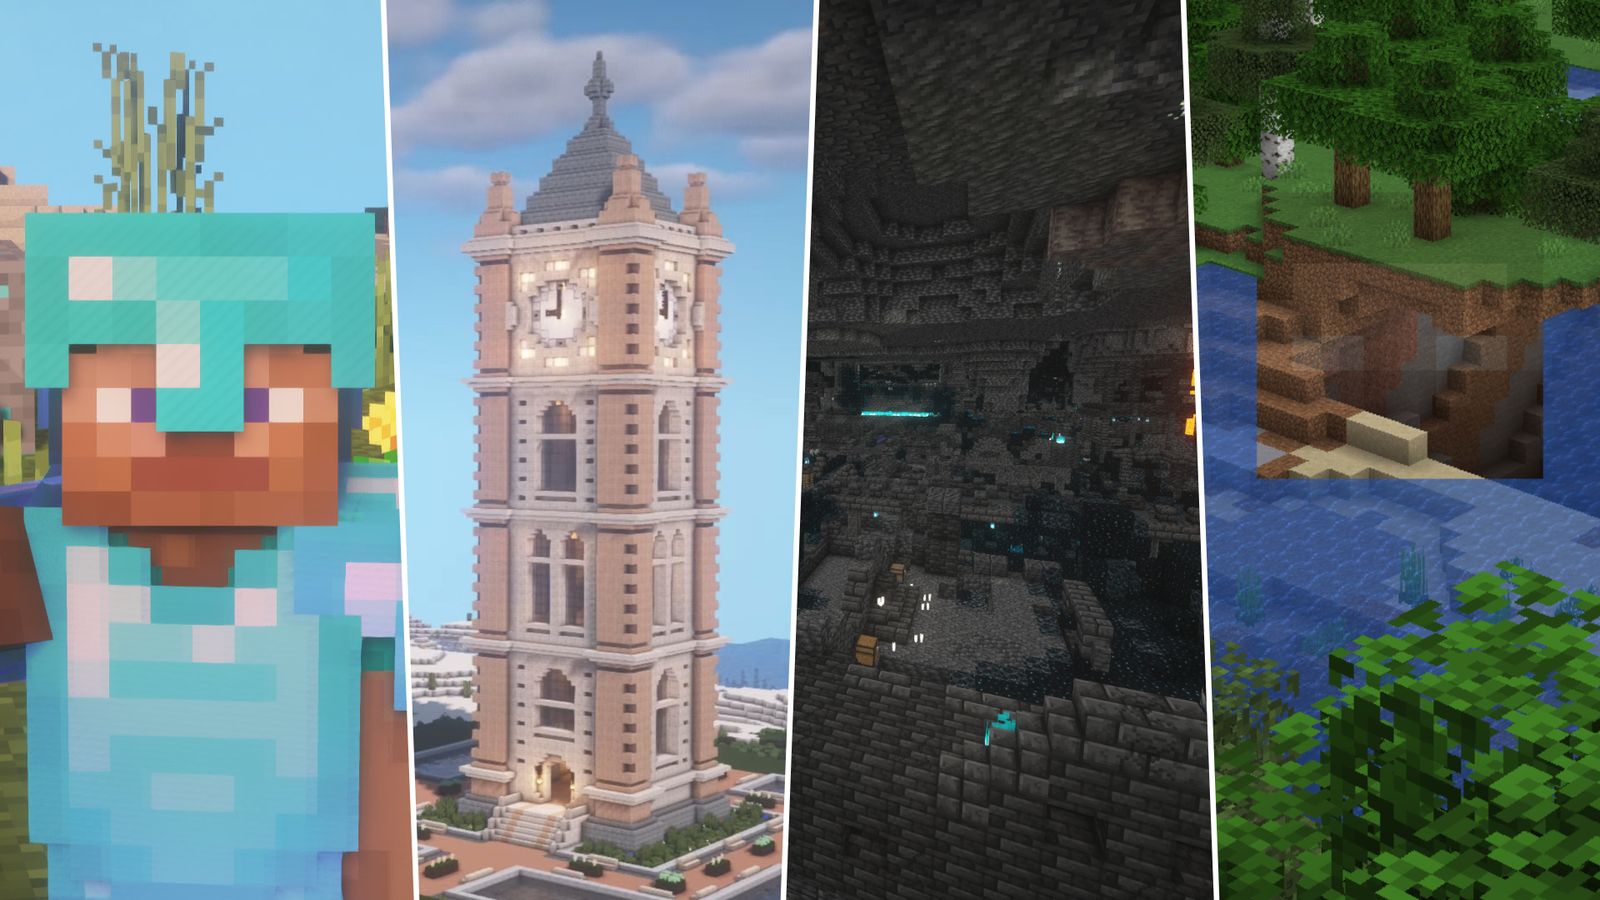 https://assetsio.gnwcdn.com/minecraft-gamemodes.jpg?width=1600&height=900&fit=crop&quality=100&format=png&enable=upscale&auto=webp